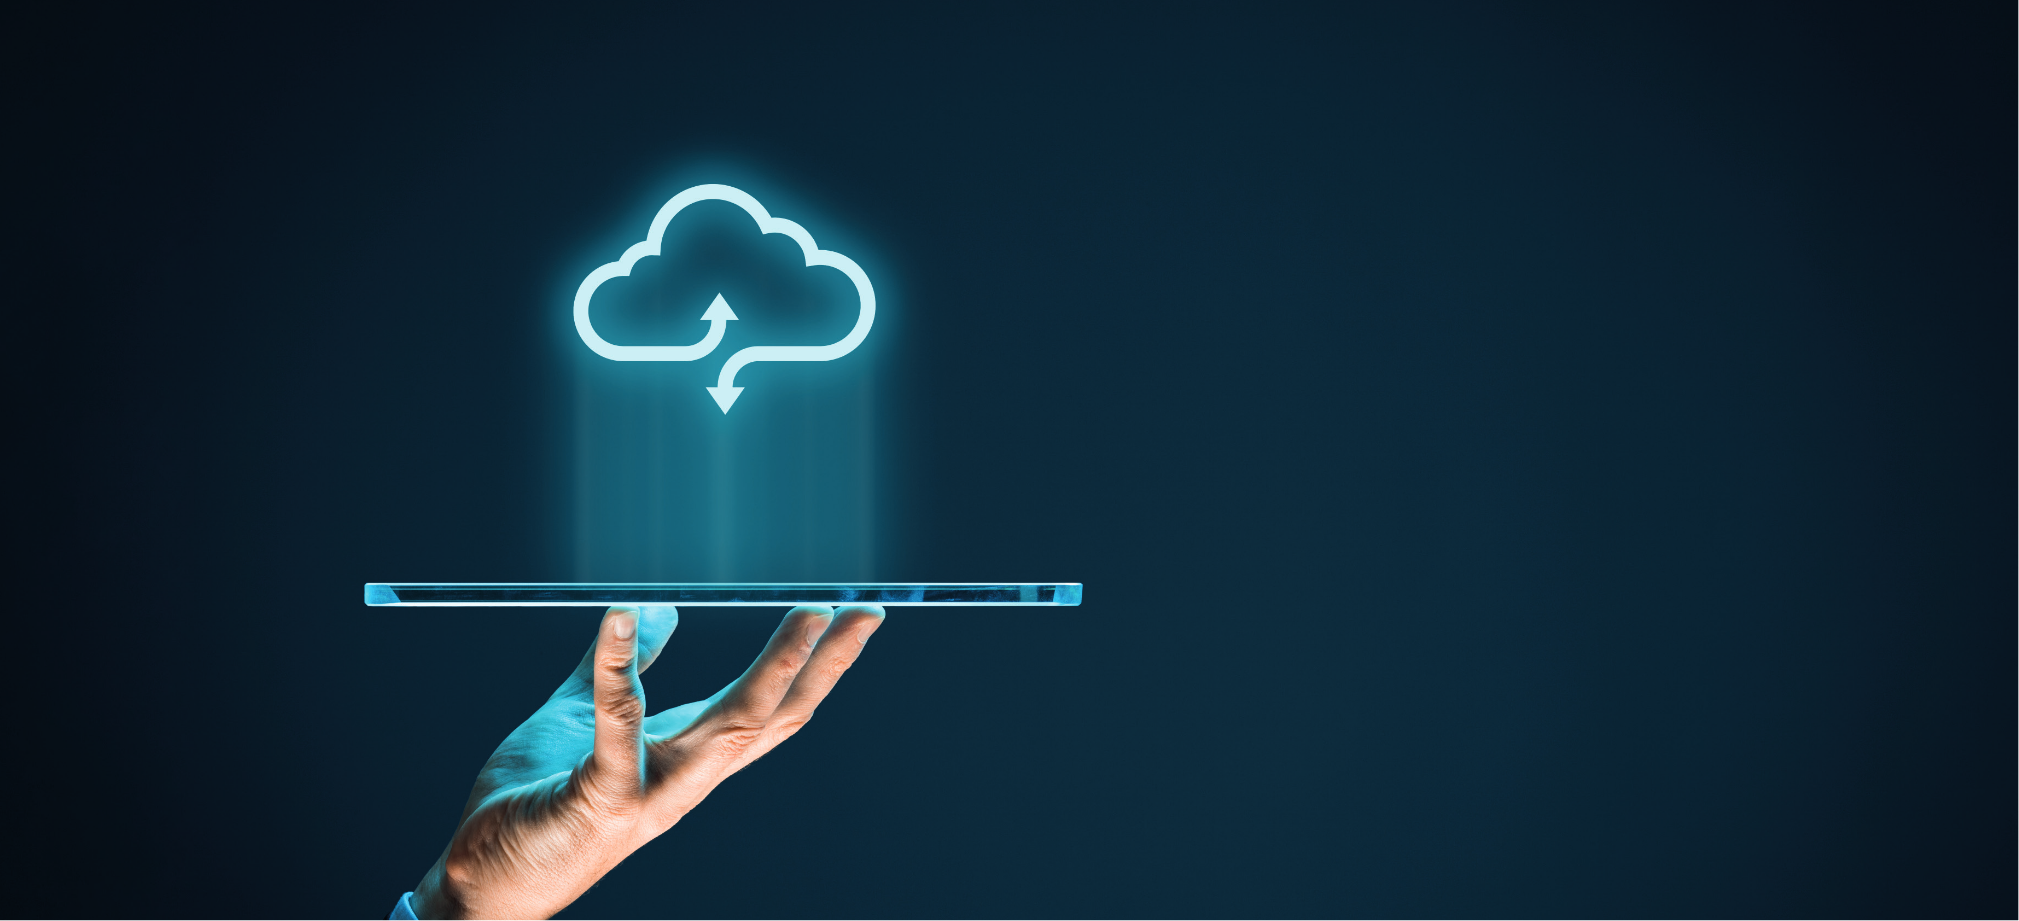 The sky’s the limit - implementing cloud integration